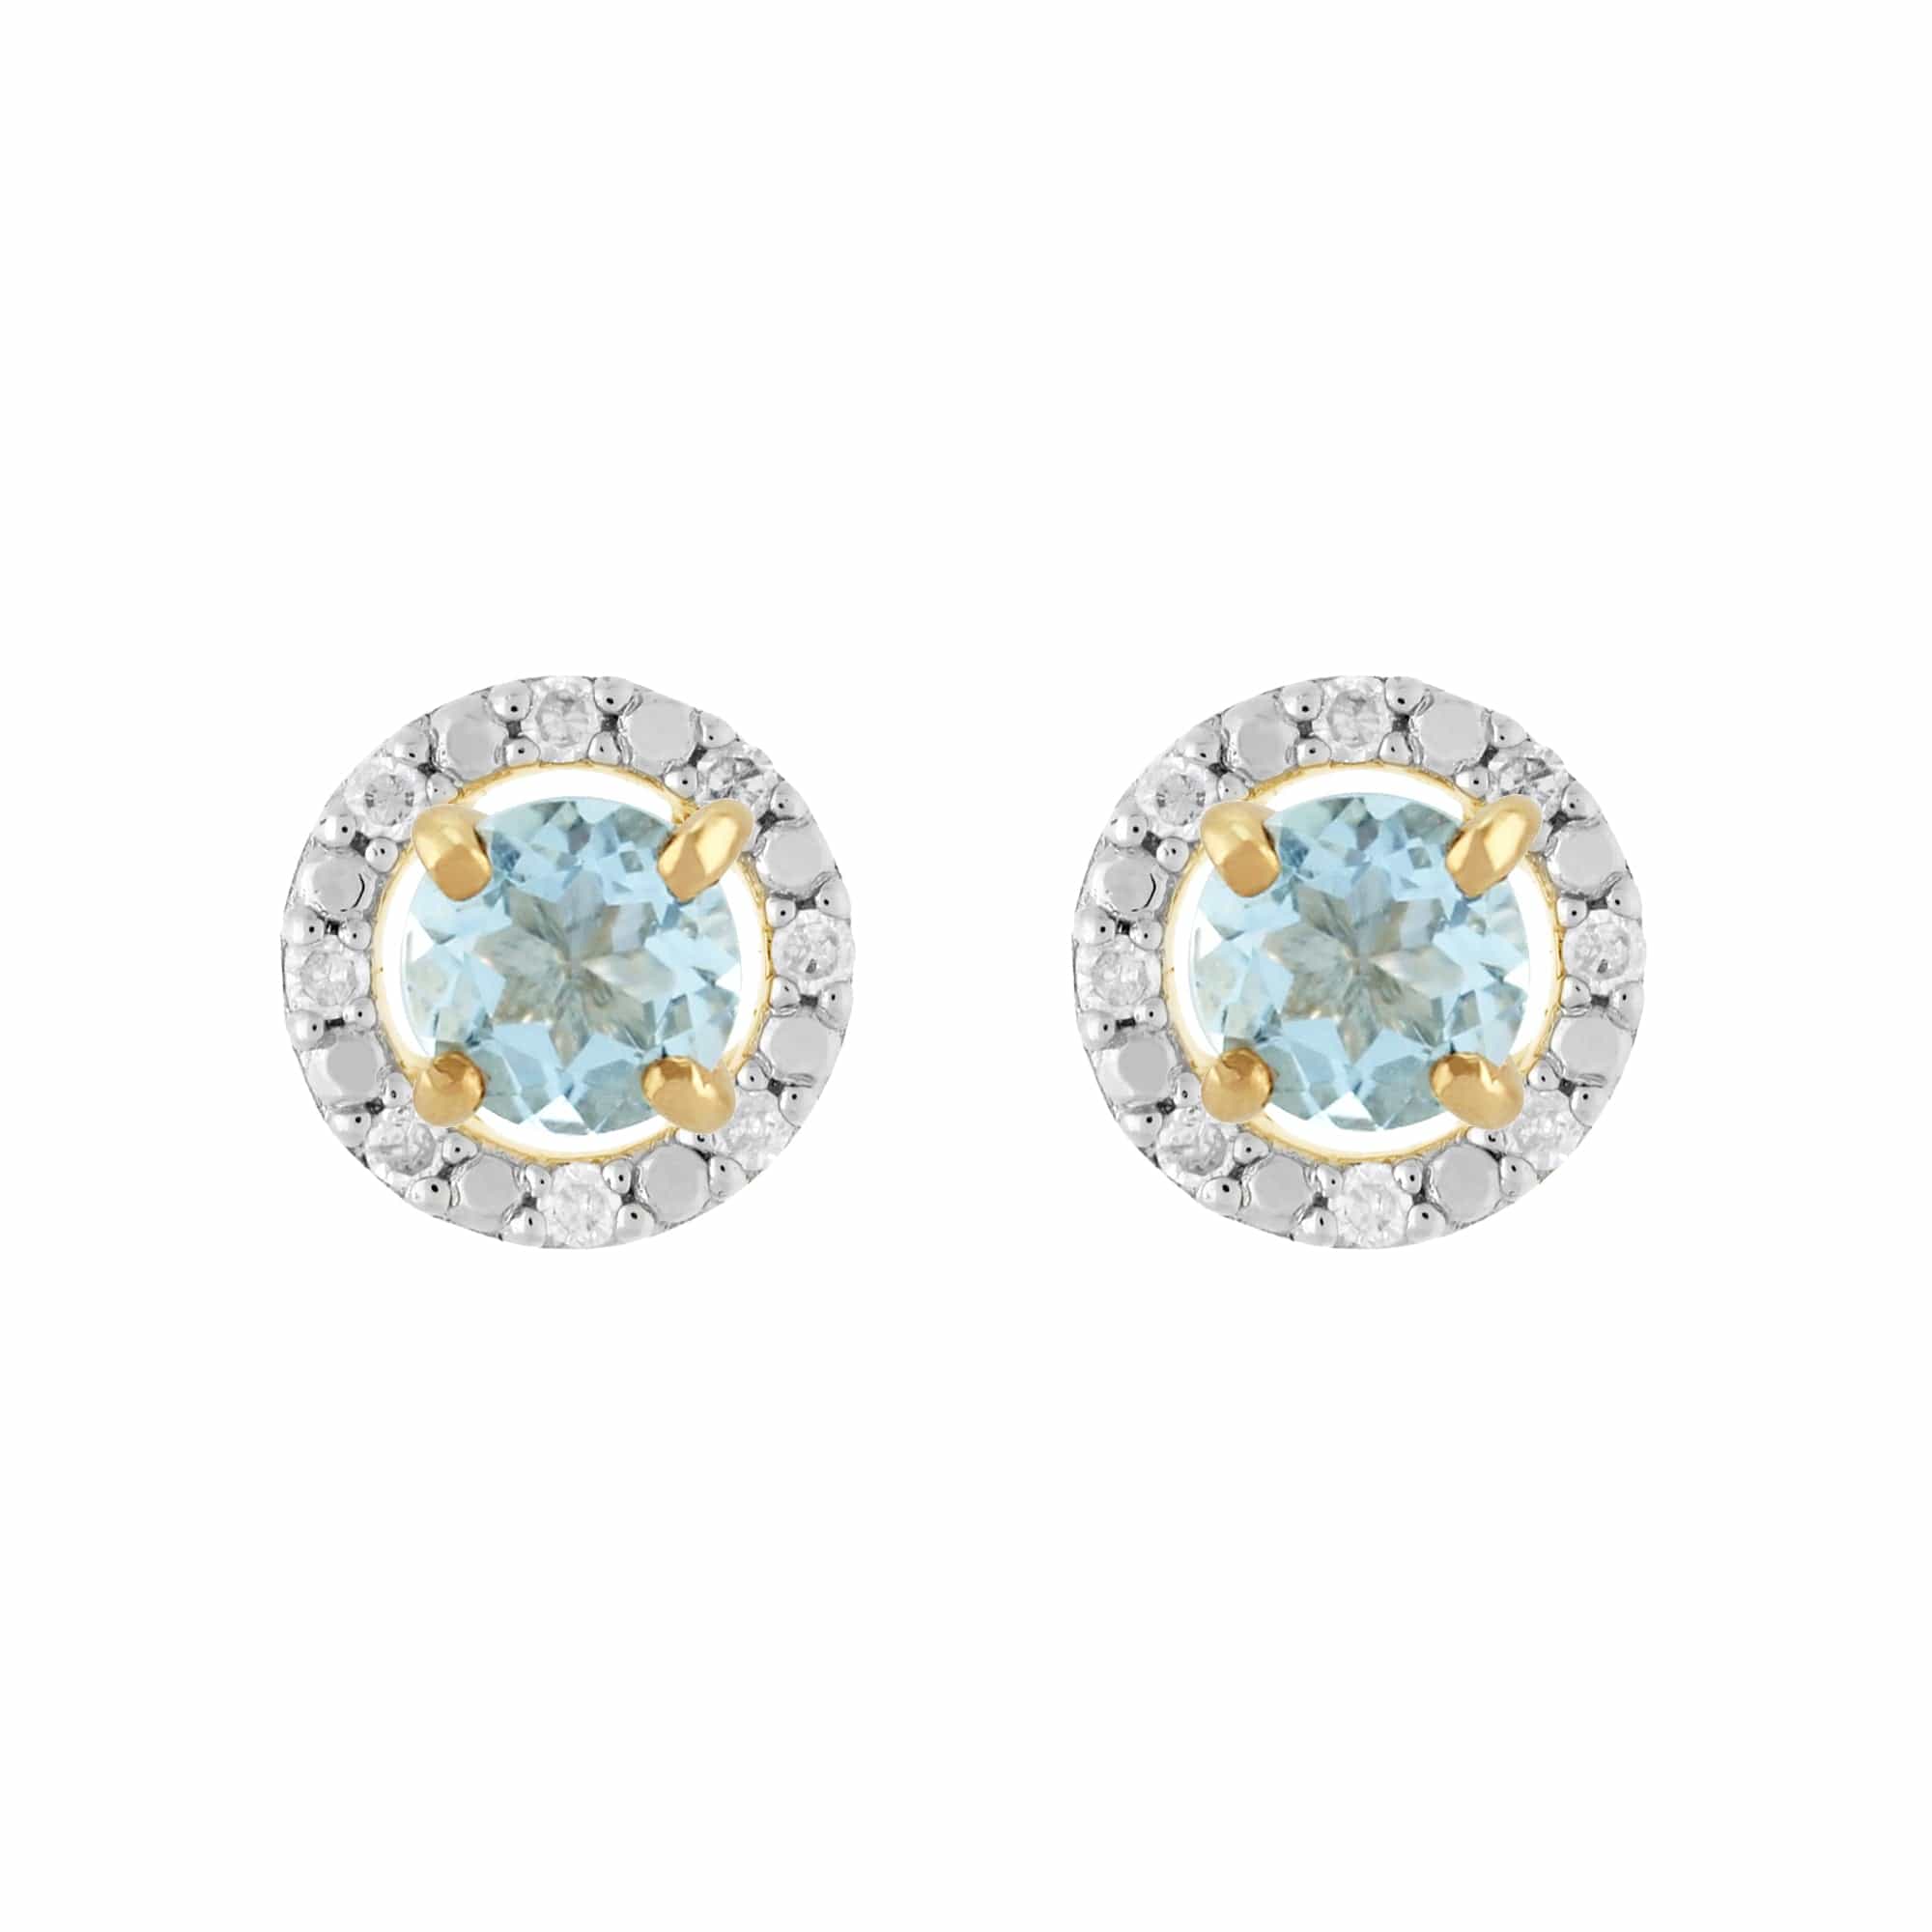 11567-191E0376019 Classic Round Aquamarine Stud Earrings with Detachable Diamond Round Earrings Jacket Set in 9ct Yellow Gold 1